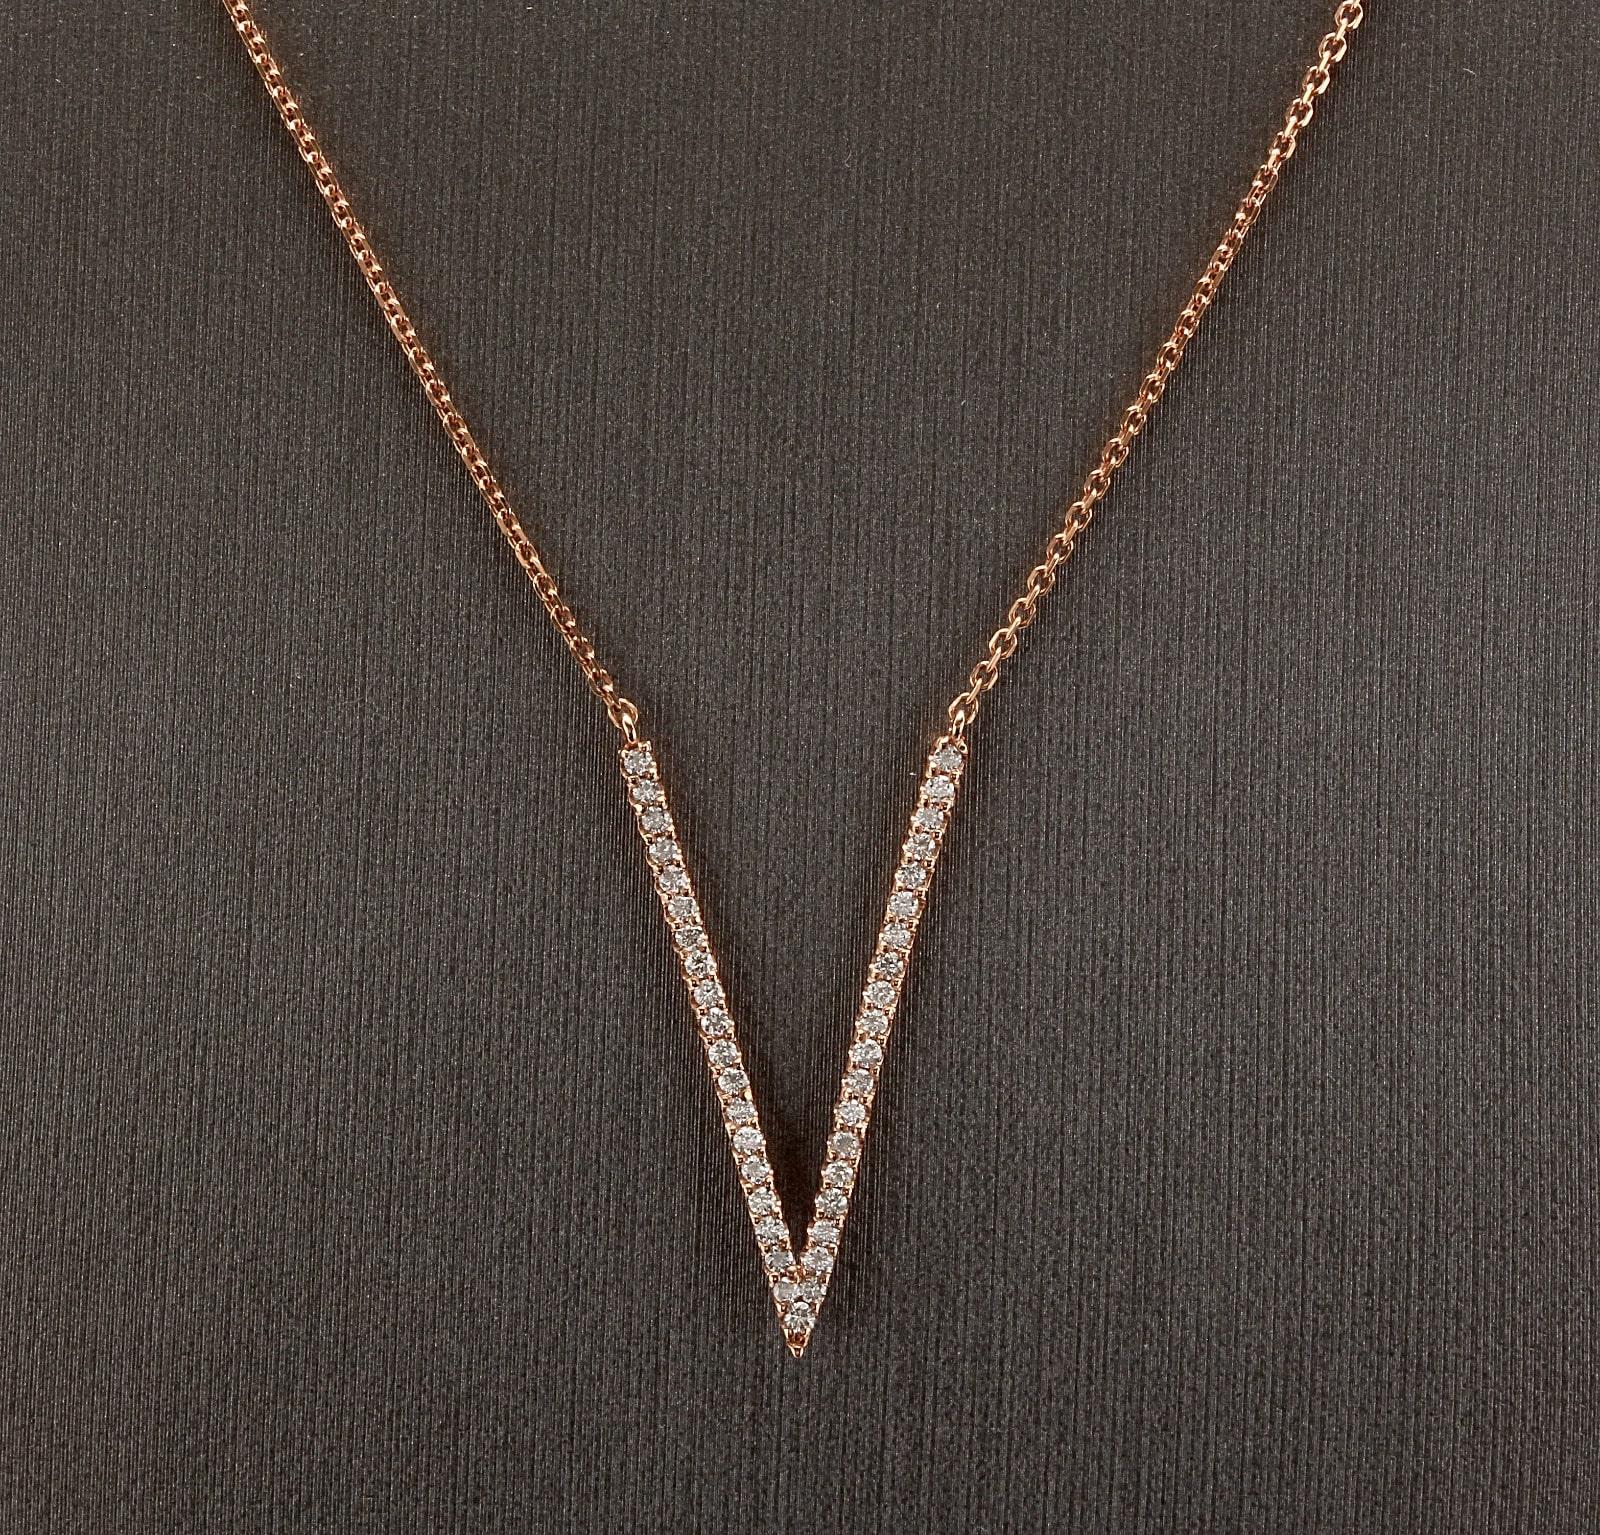 0.45Ct Splendid 14k Solid Rose Gold Chain Necklace

Amazing looking piece!

Stamped: 14k

Total Natural Round Diamond Weight is: Approx. 0.45 Carats (G-H / SI1-SI2)

Chain Length is: 18 inches (can adjusted to 16